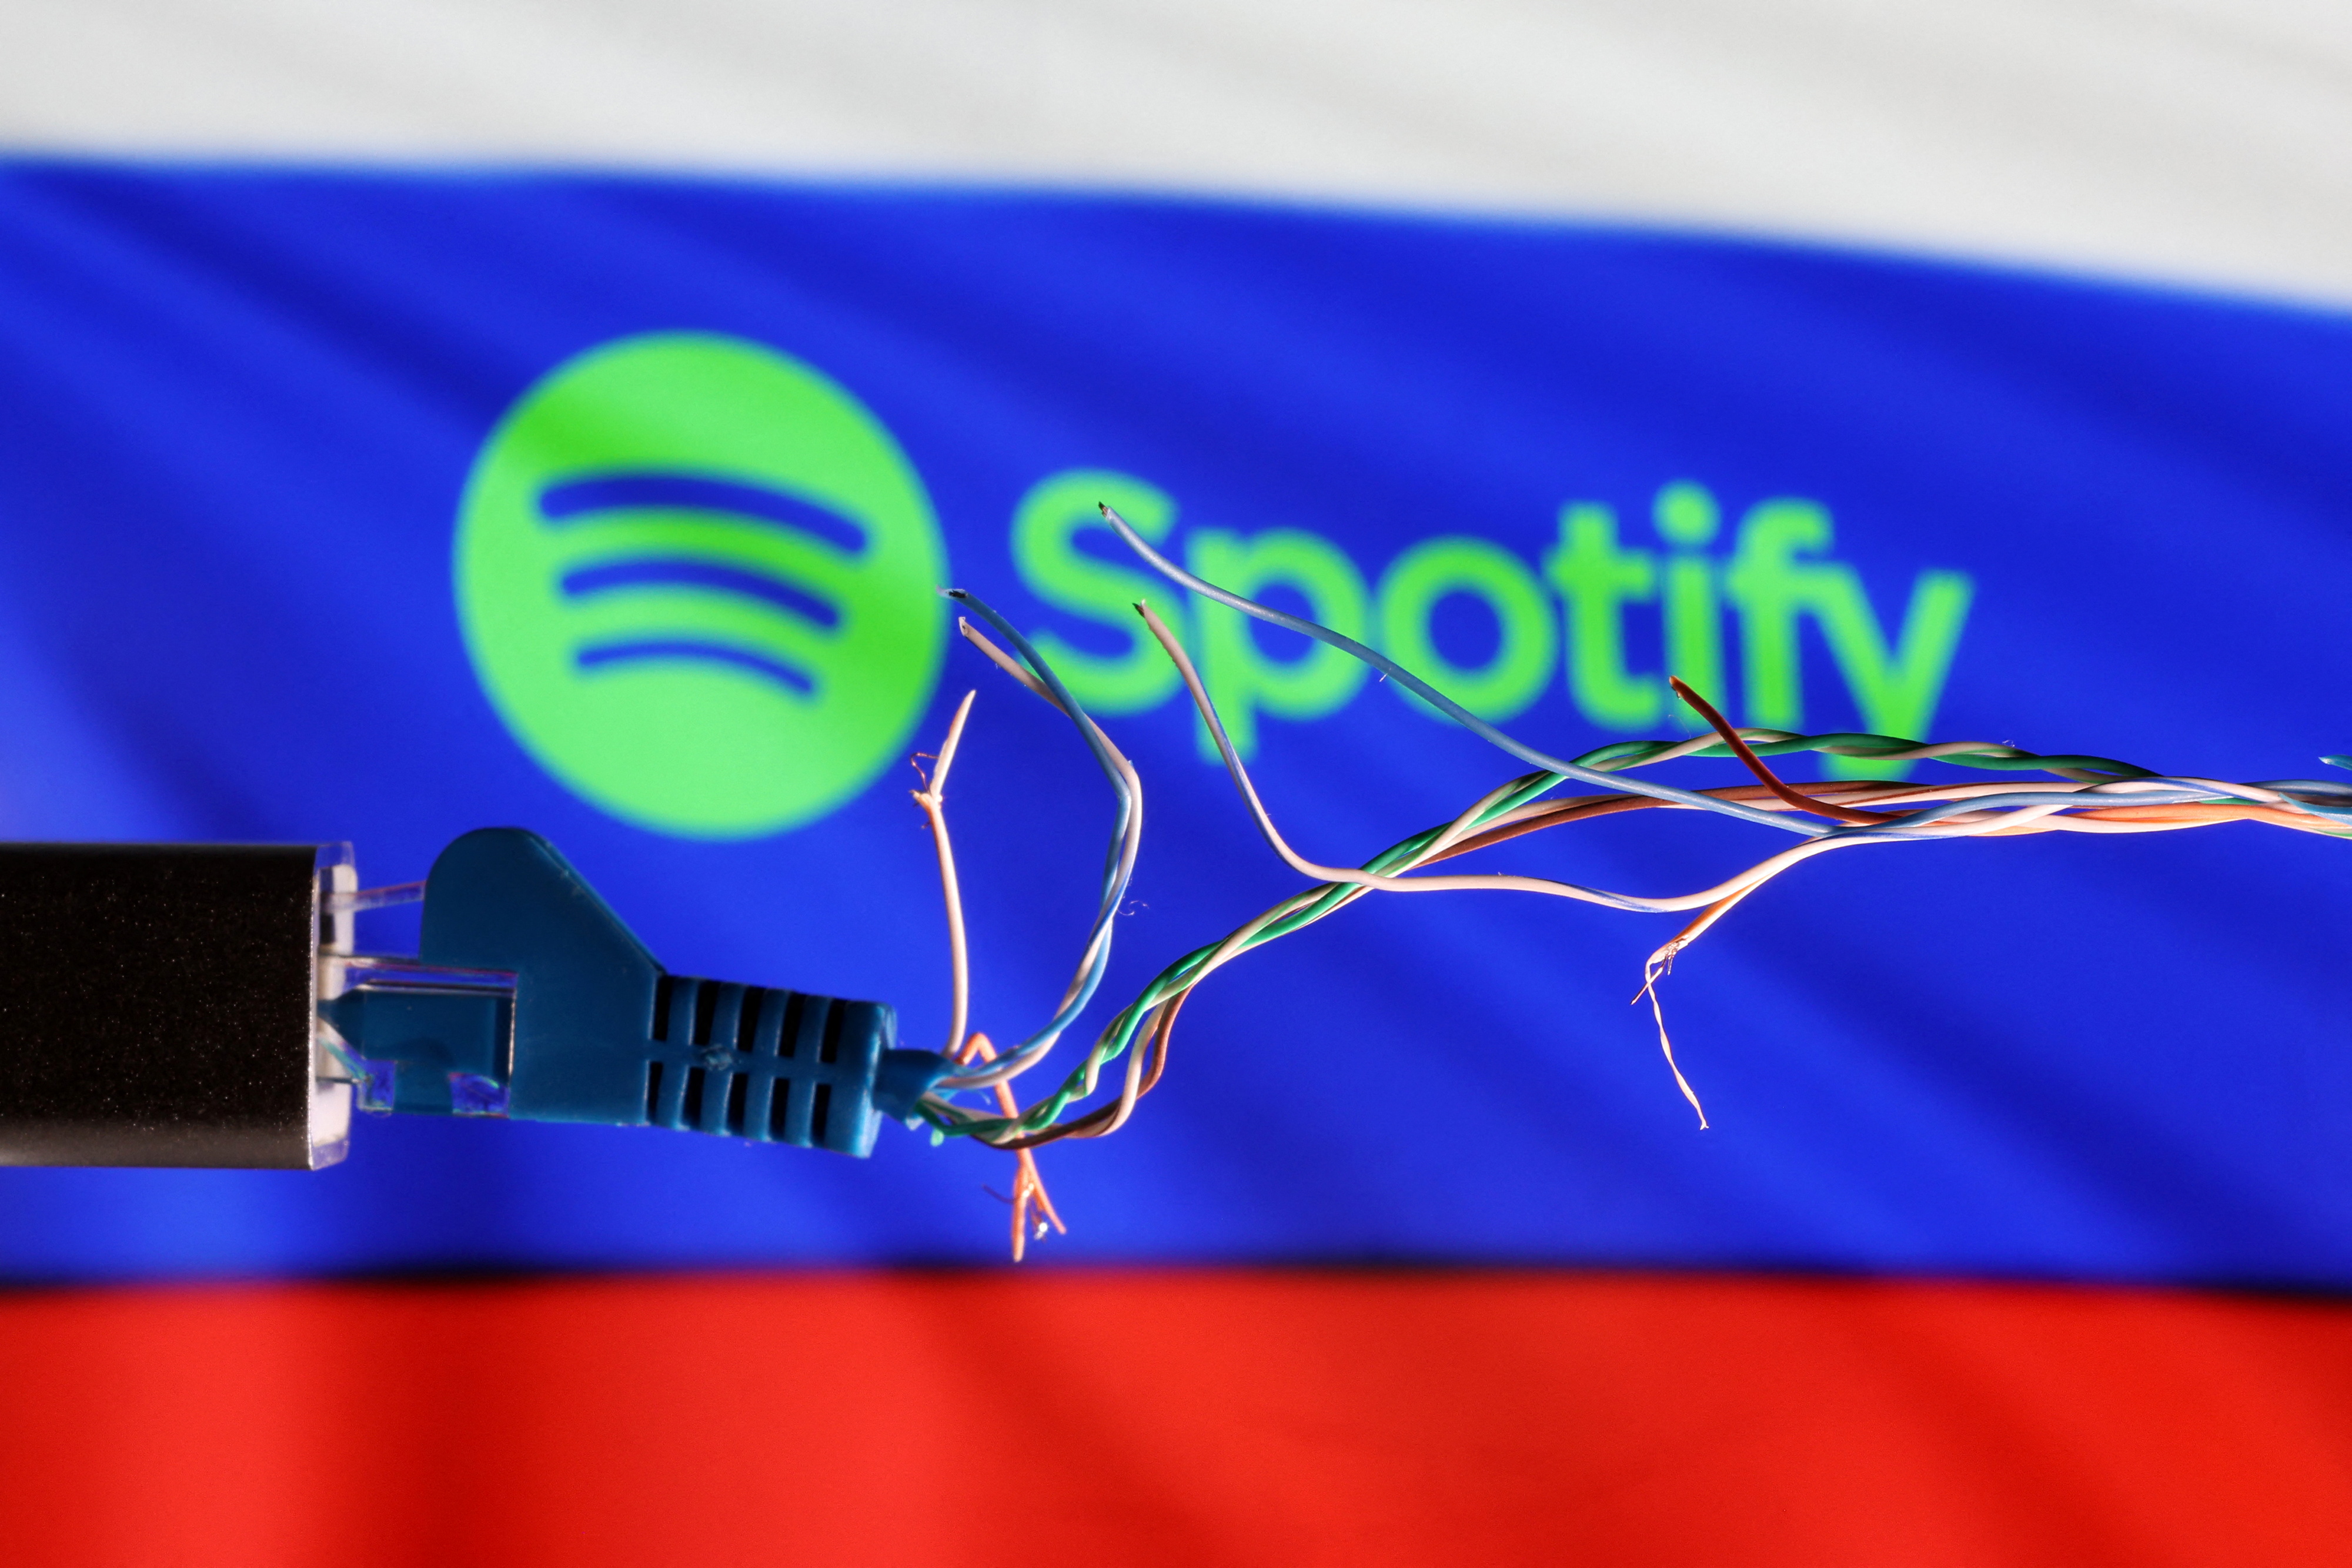 Illustration shows Broken Ethernet cable, Russian flag and Spotify logo